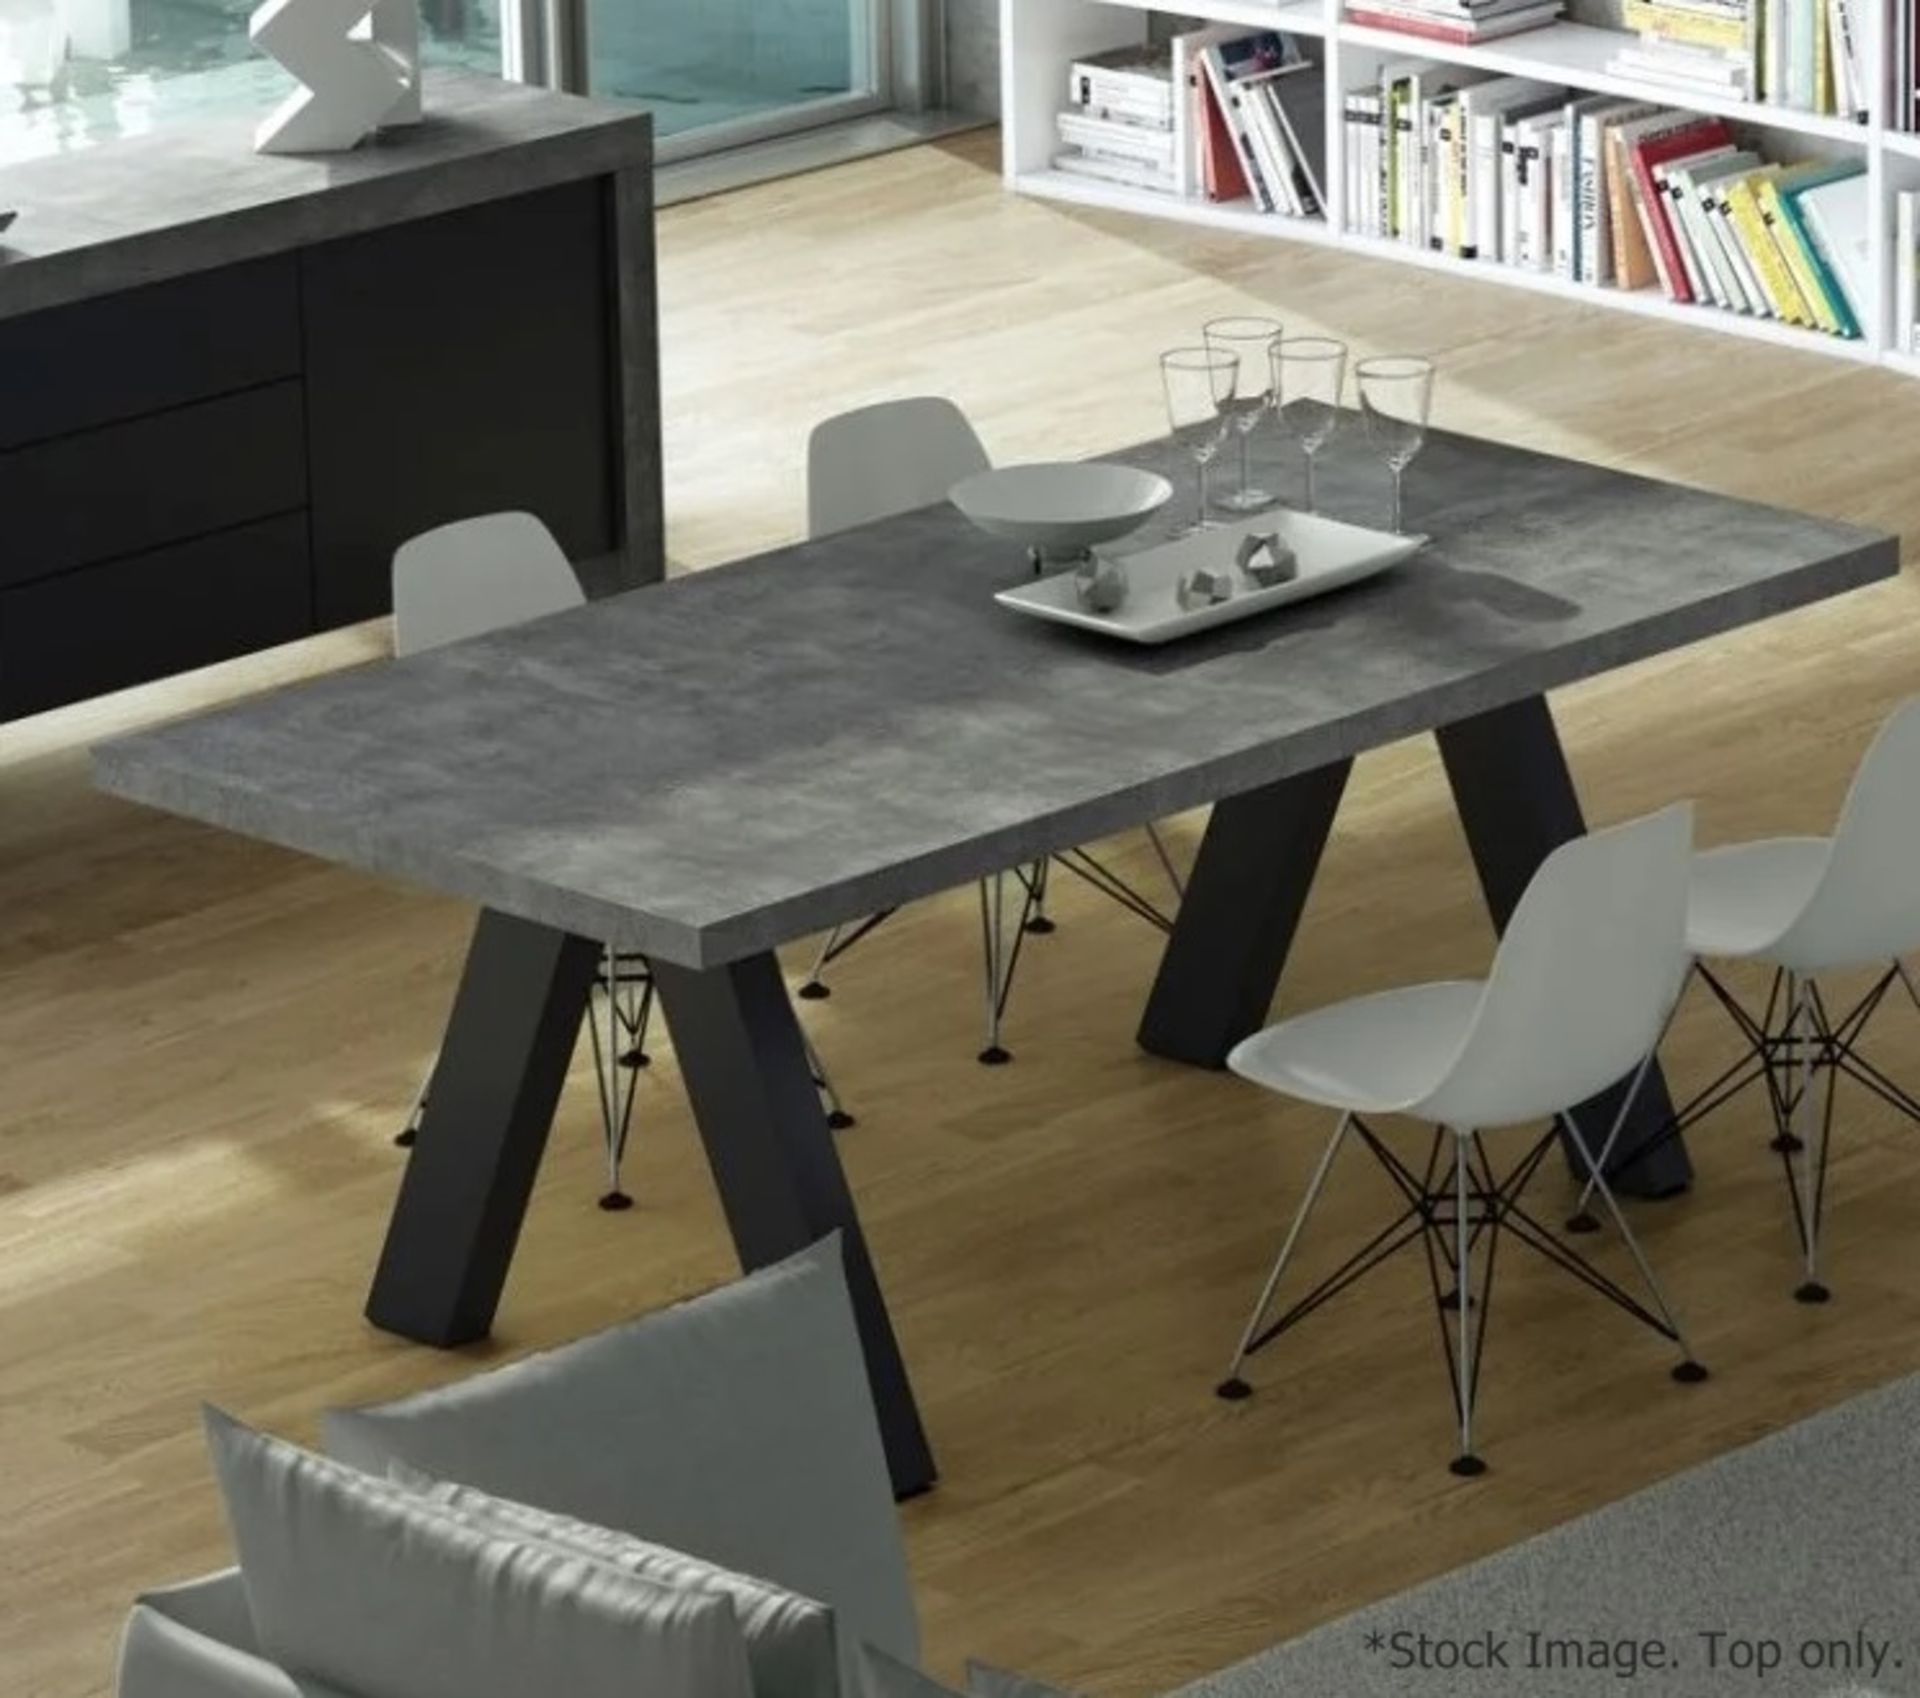 1 x Temahome 'Apex' Concrete-style and Black Extending Dining Table Top (No Base) - Dimensions: